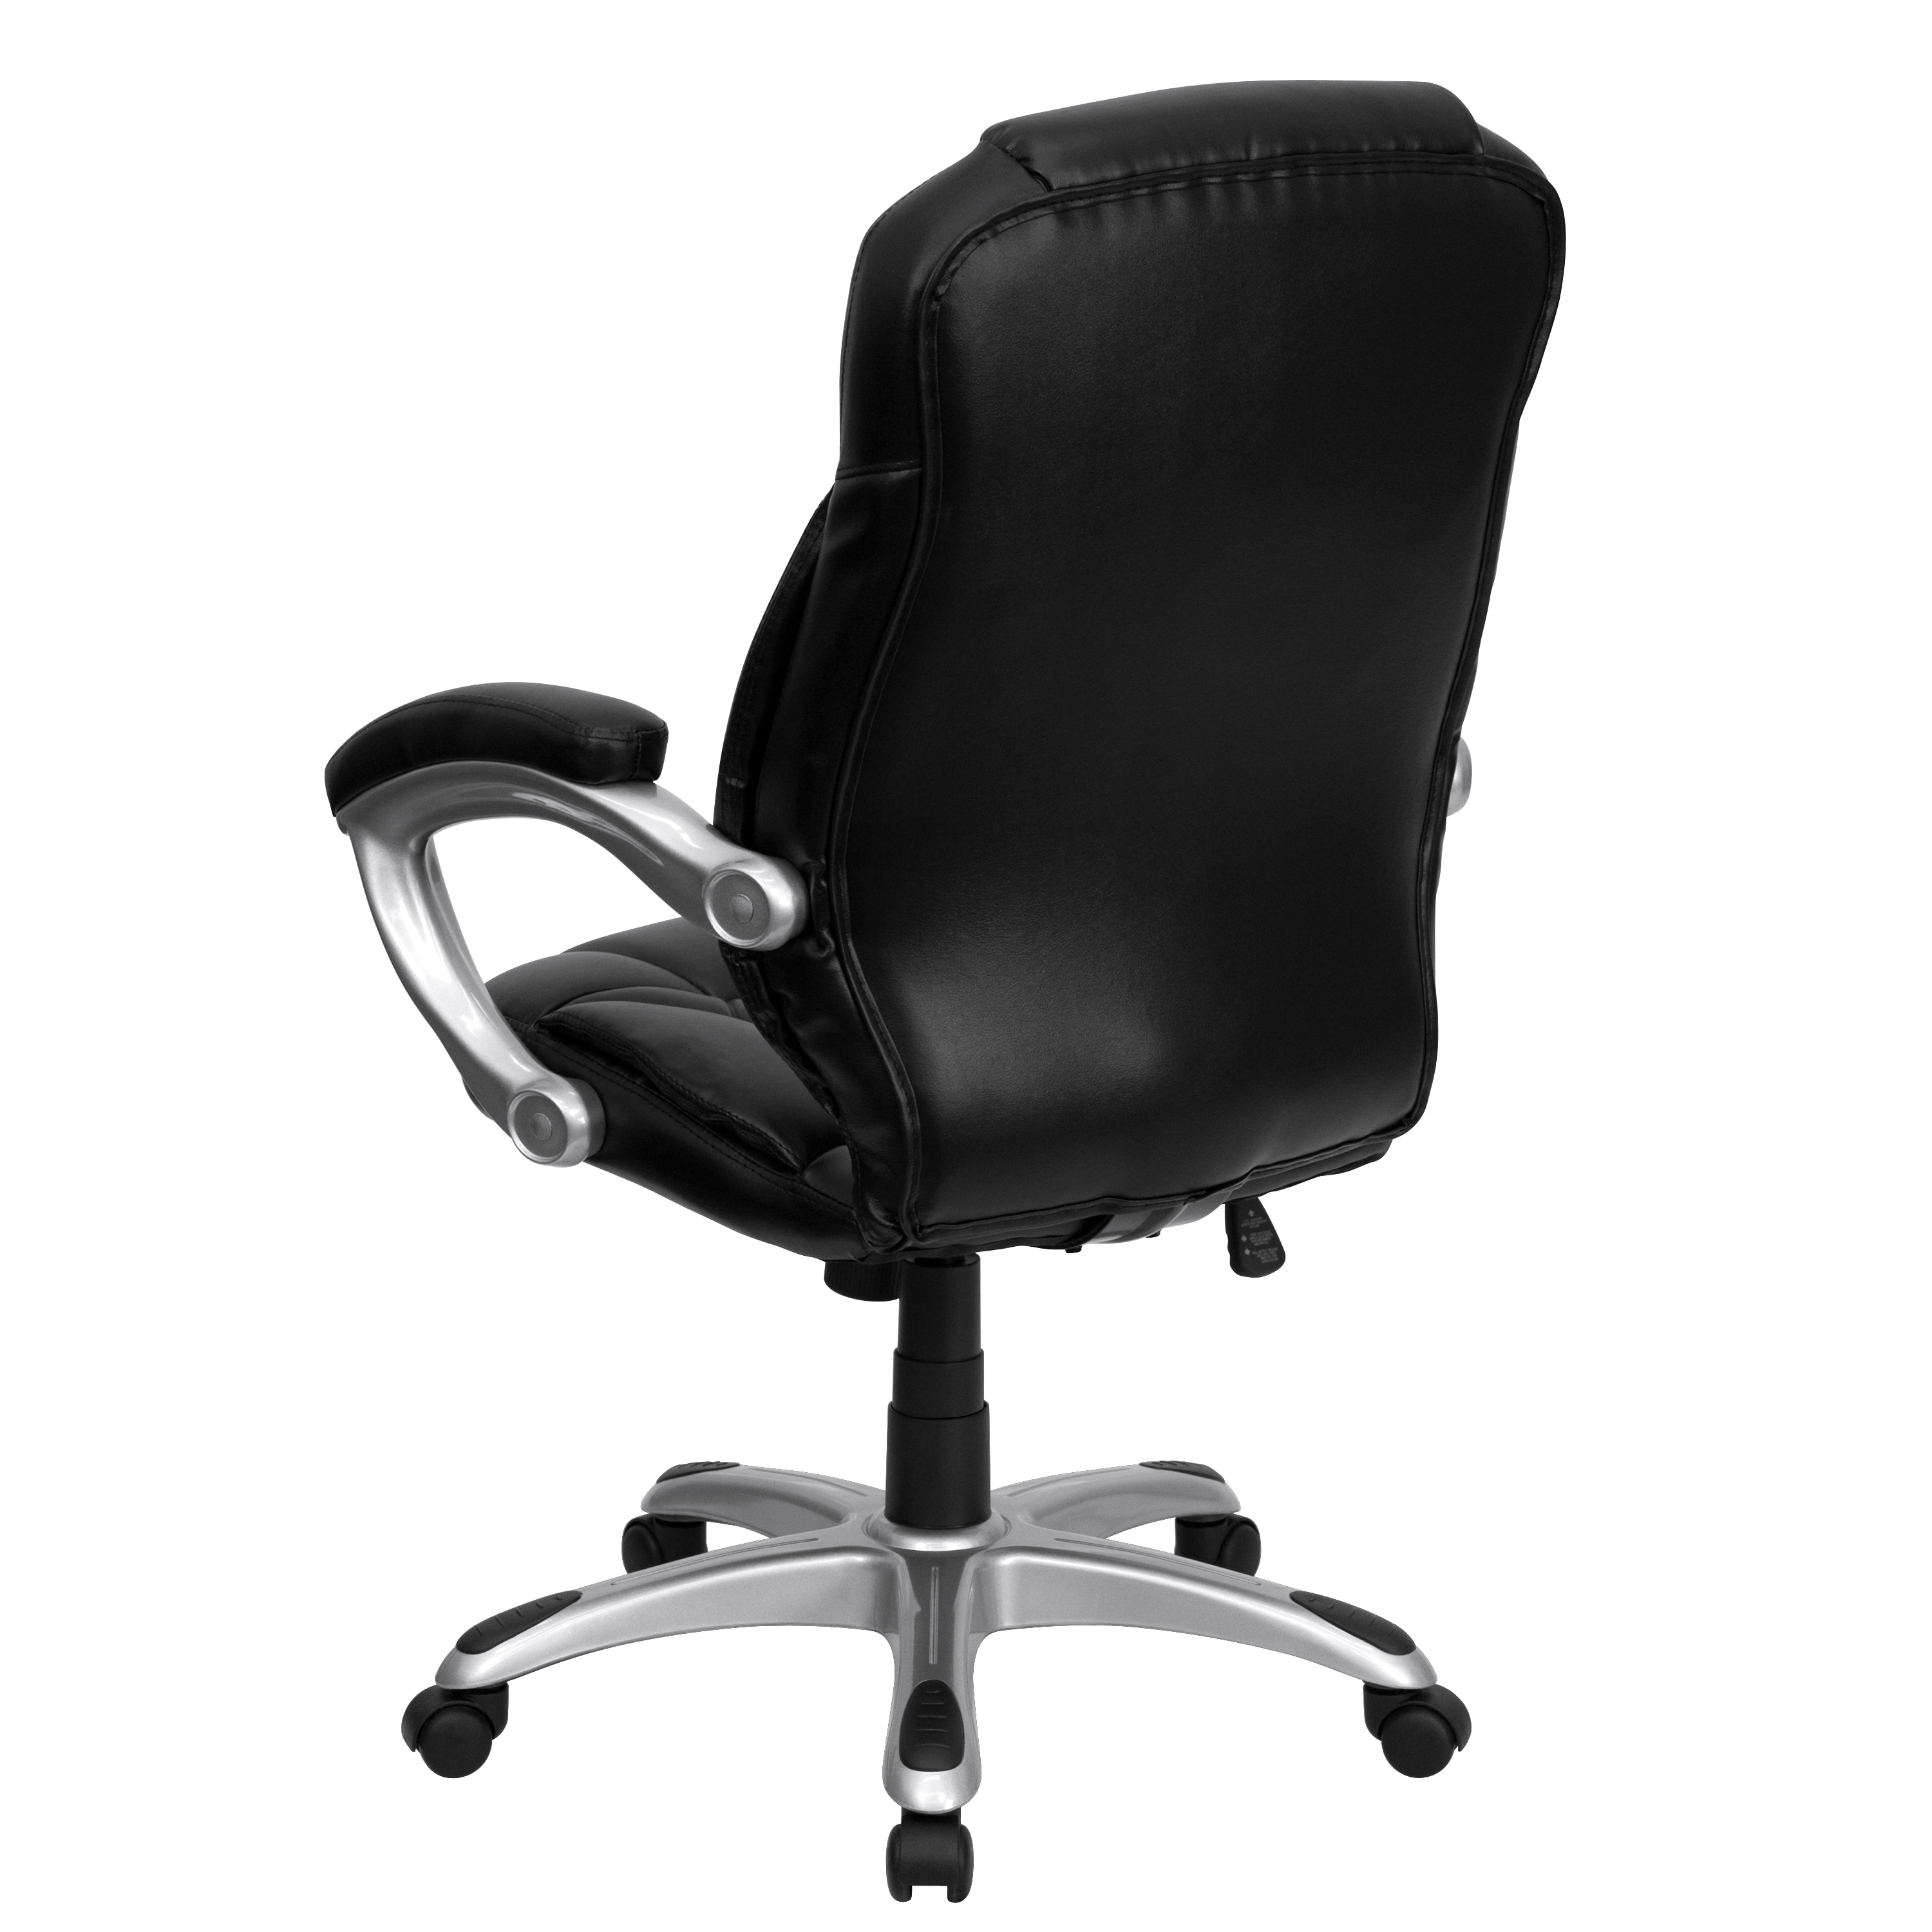 Flash Furniture High Back Black LeatherSoft Contemporary Executive Swivel Ergonomic Office Chair with Silver Nylon Base and Arms - image 4 of 6